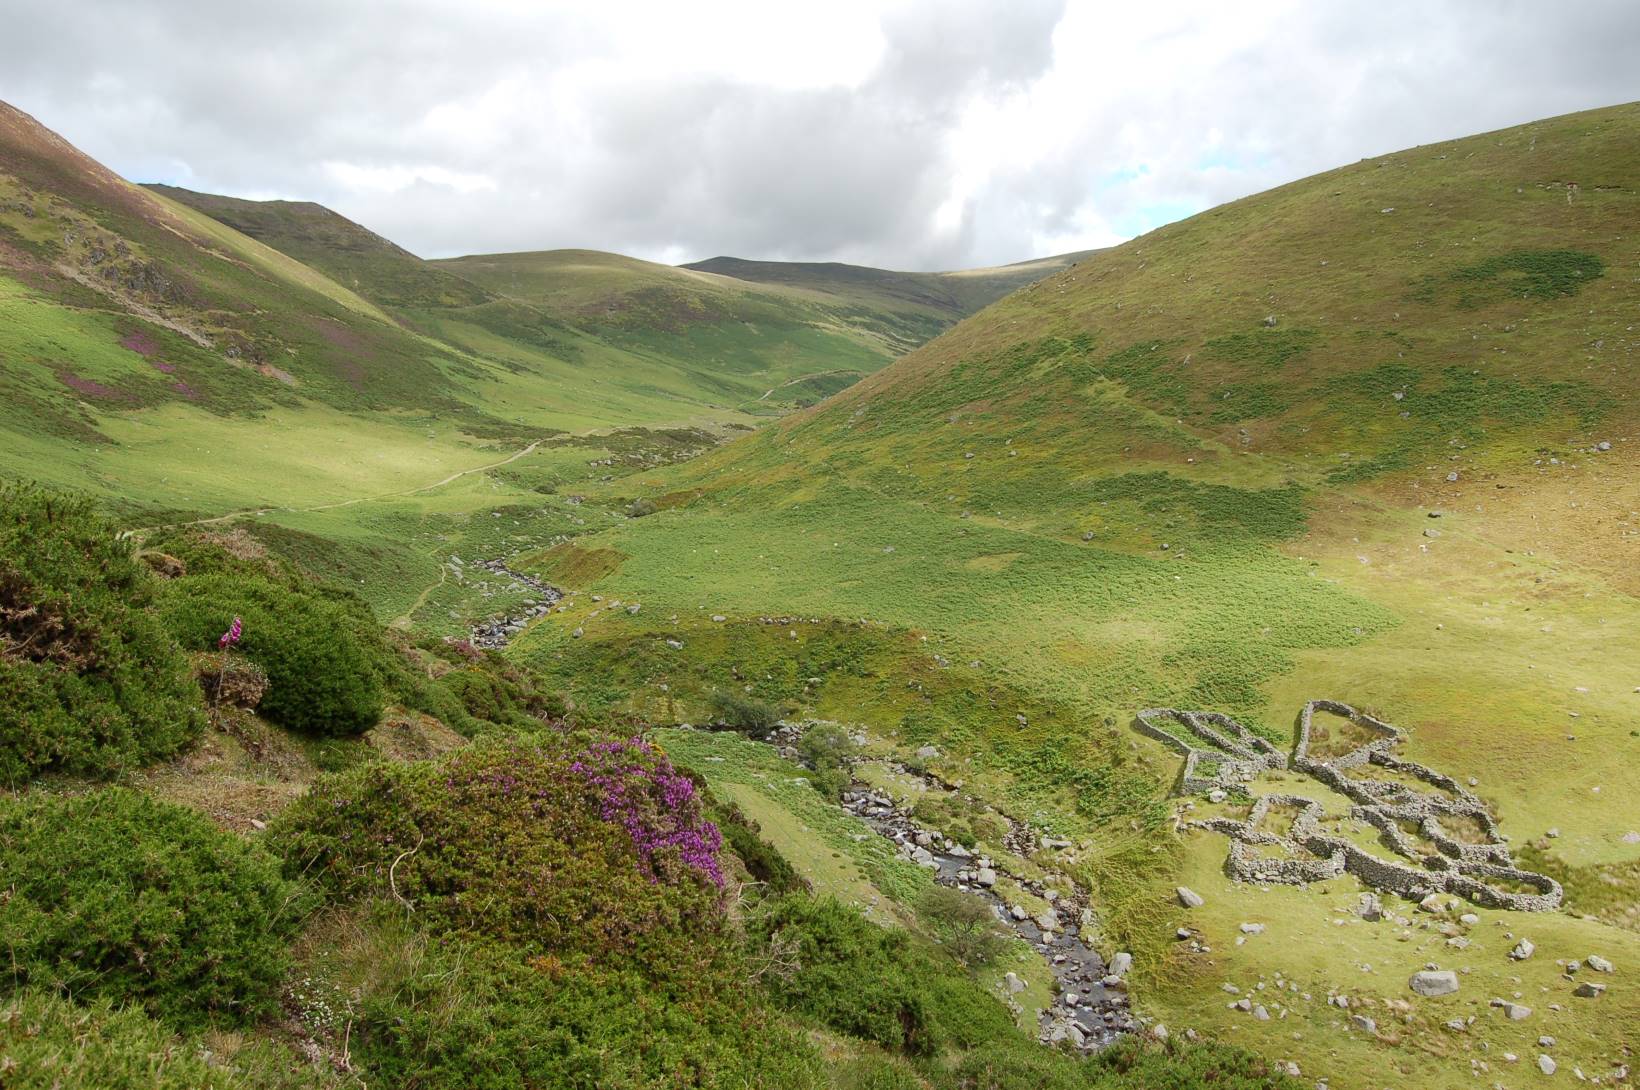 The rolling hills of the Anafon Valley stretch into the distance and an old sheepfold can be seen on one of them.